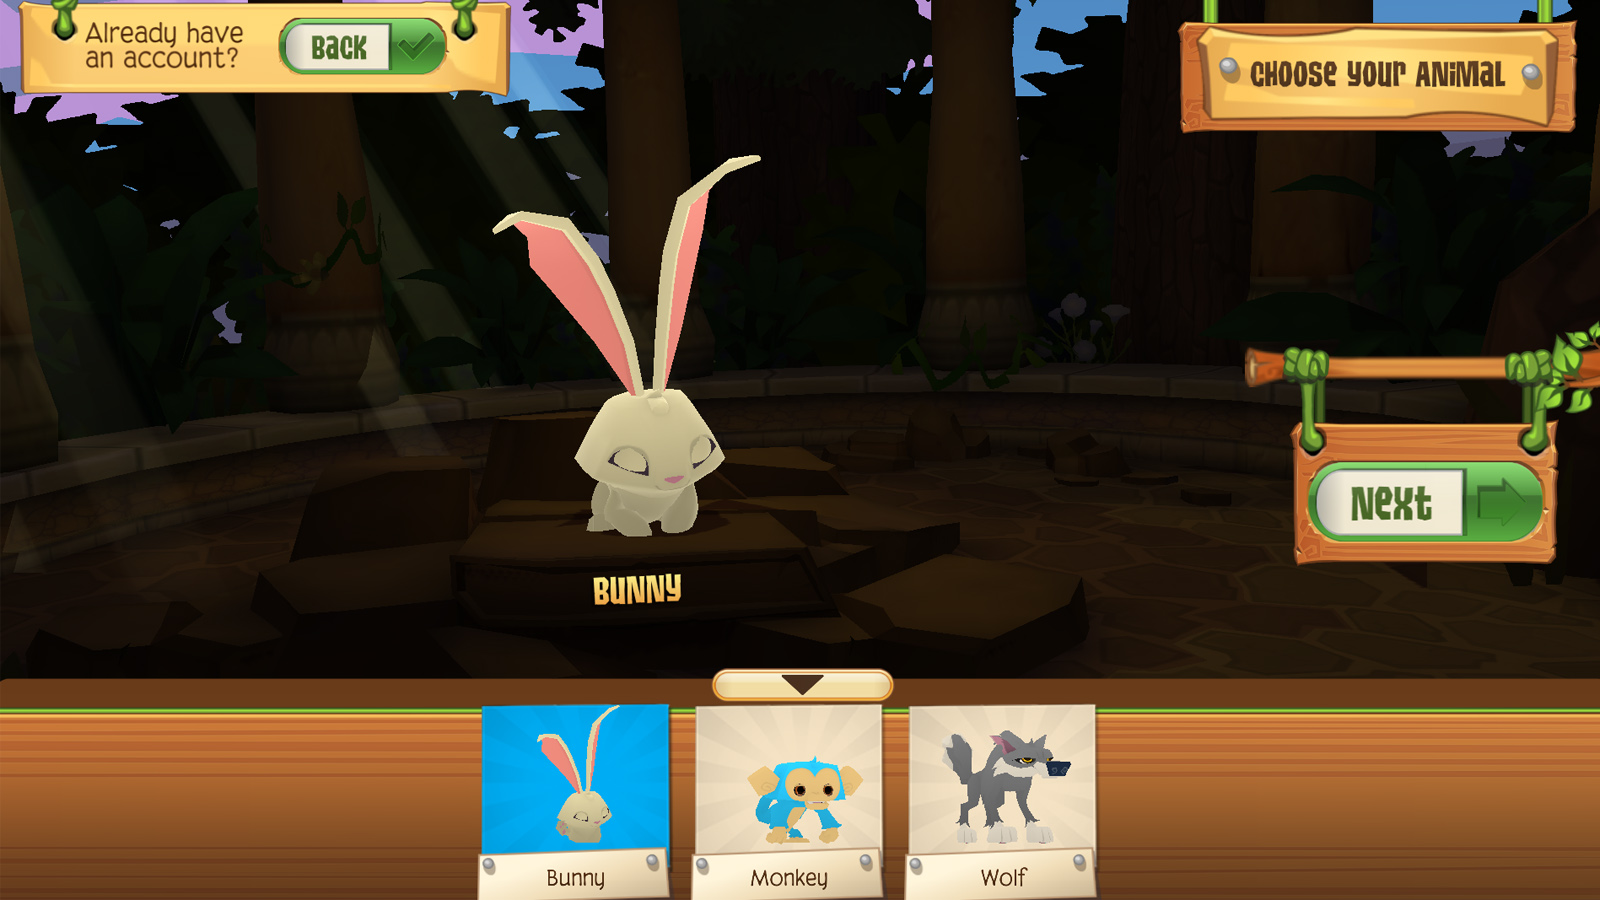 Find pricing, reviews and other details about Animal Jam